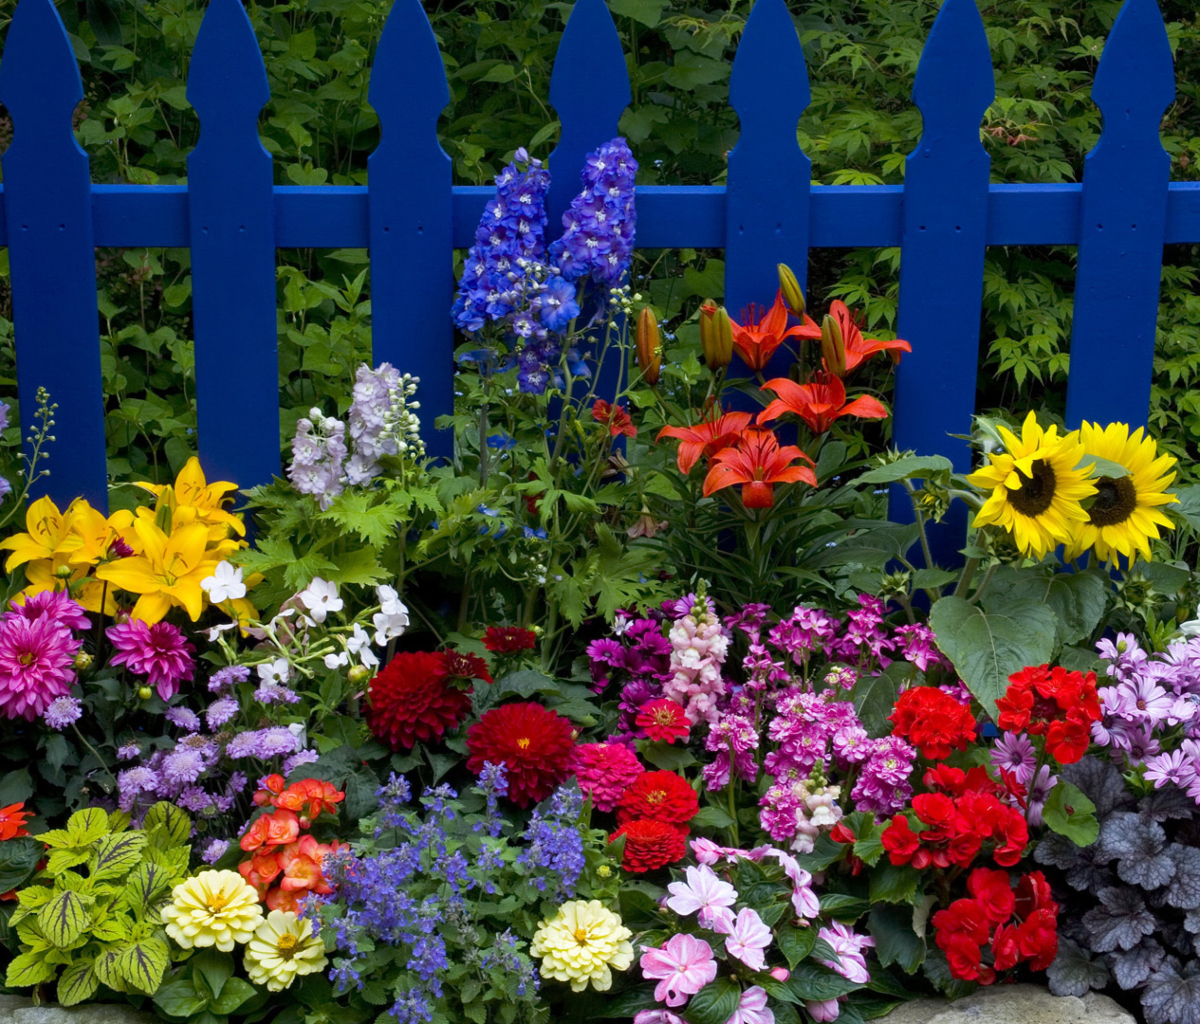 Garden Flowers In Front Of Bright Blue Fence screenshot #1 1200x1024